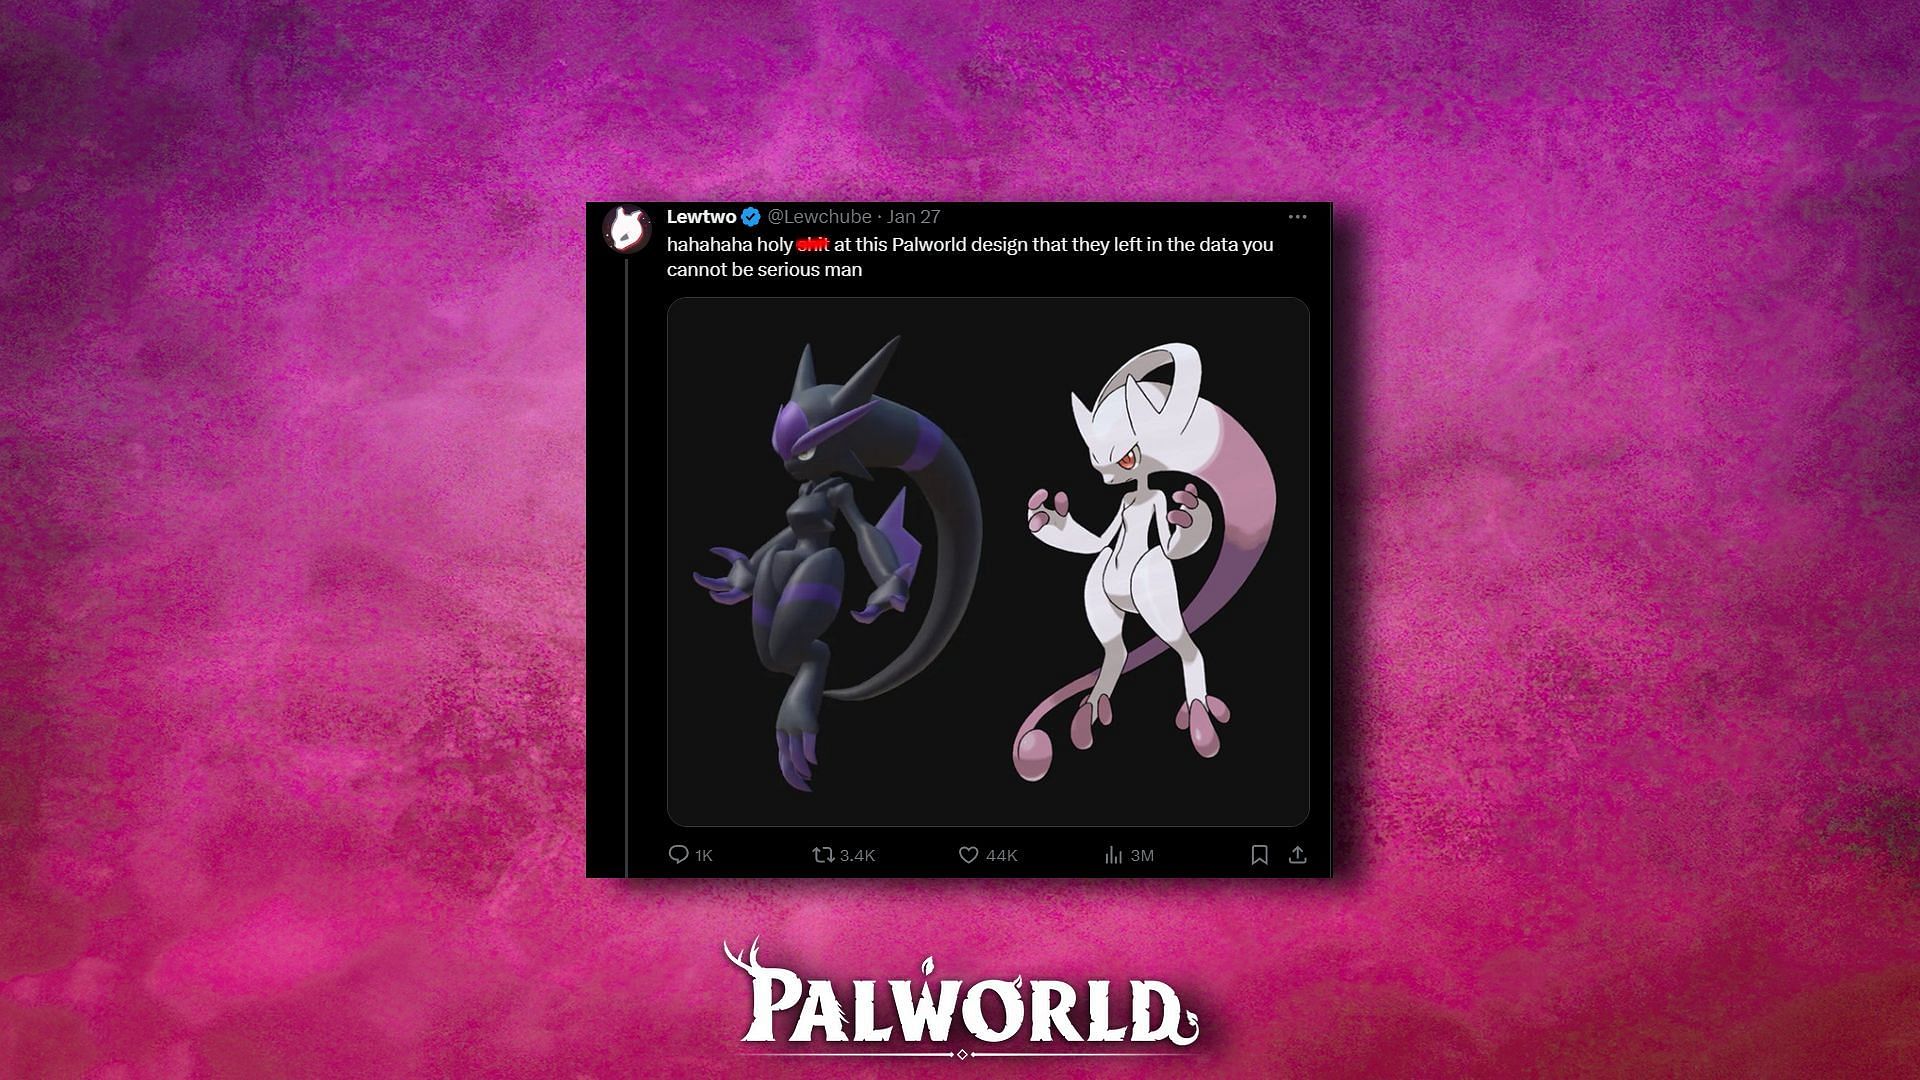 Tweet made by Lewchube on Twitter about the datamined Pal (Image via Lewchube, Twitter)